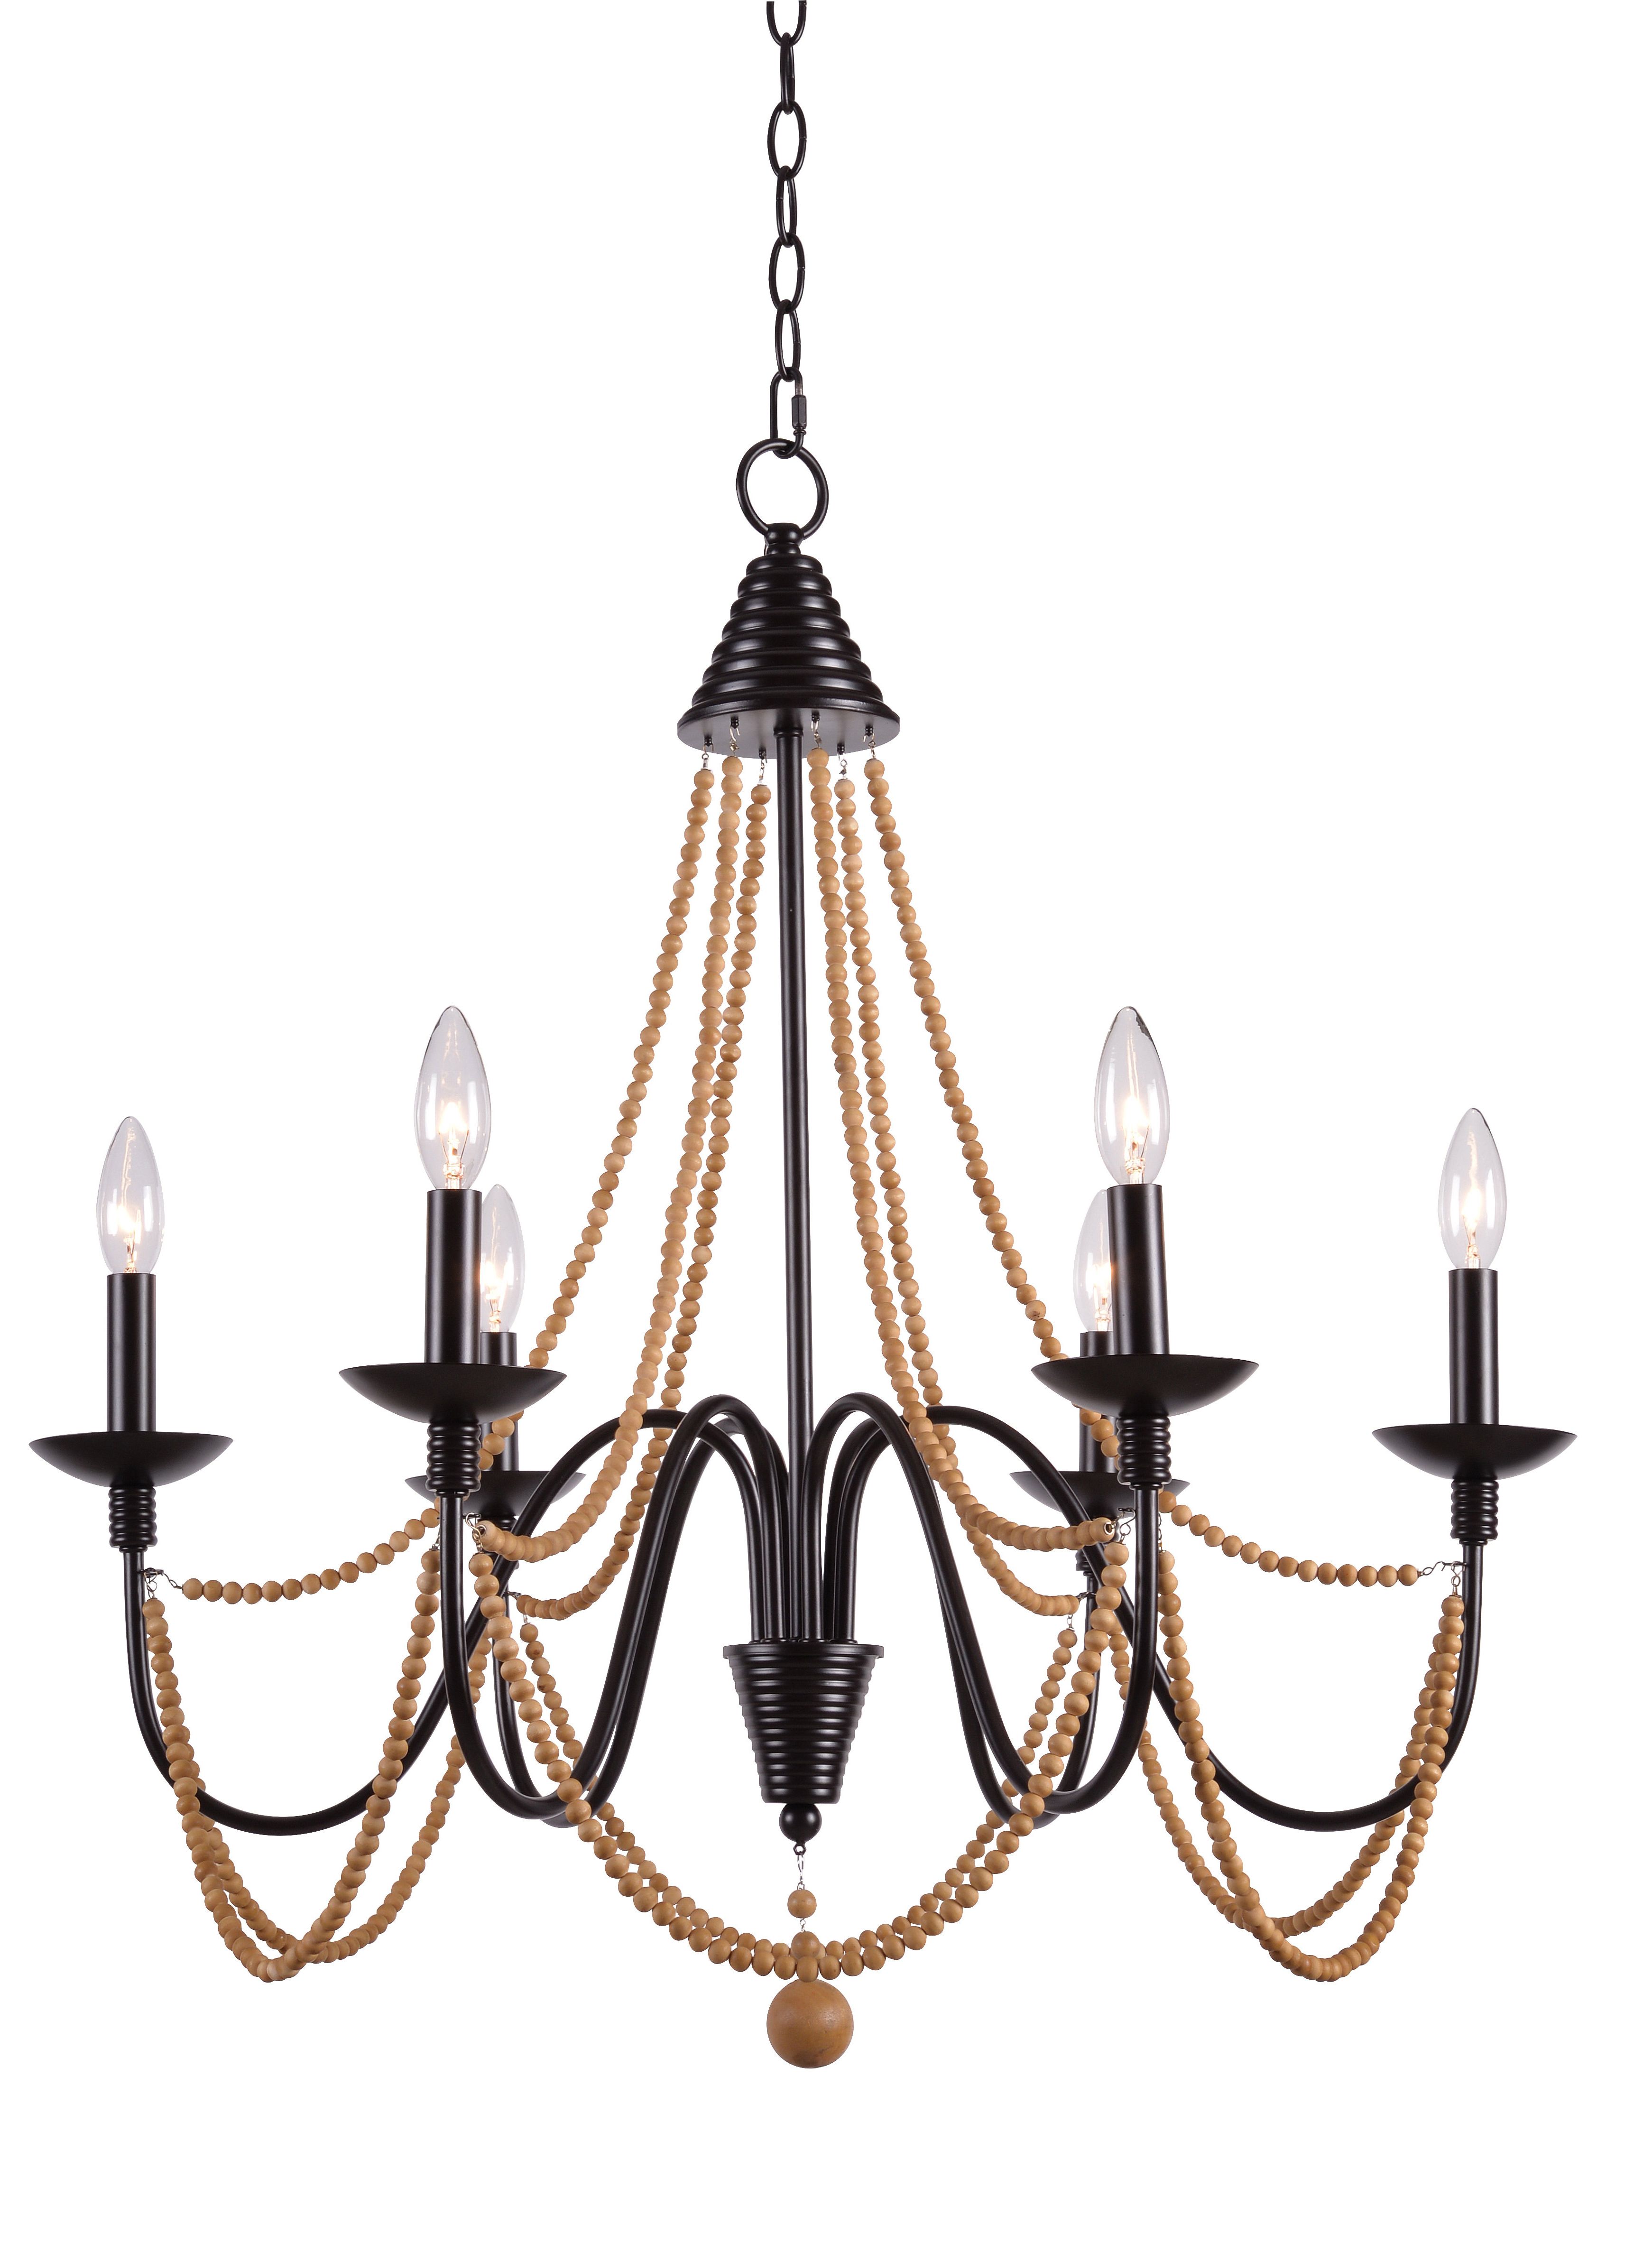 Gracie Oaks Clayburn 6 Light Candle Style Chandelier Pertaining To Favorite Watford 6 Light Candle Style Chandeliers (View 11 of 25)